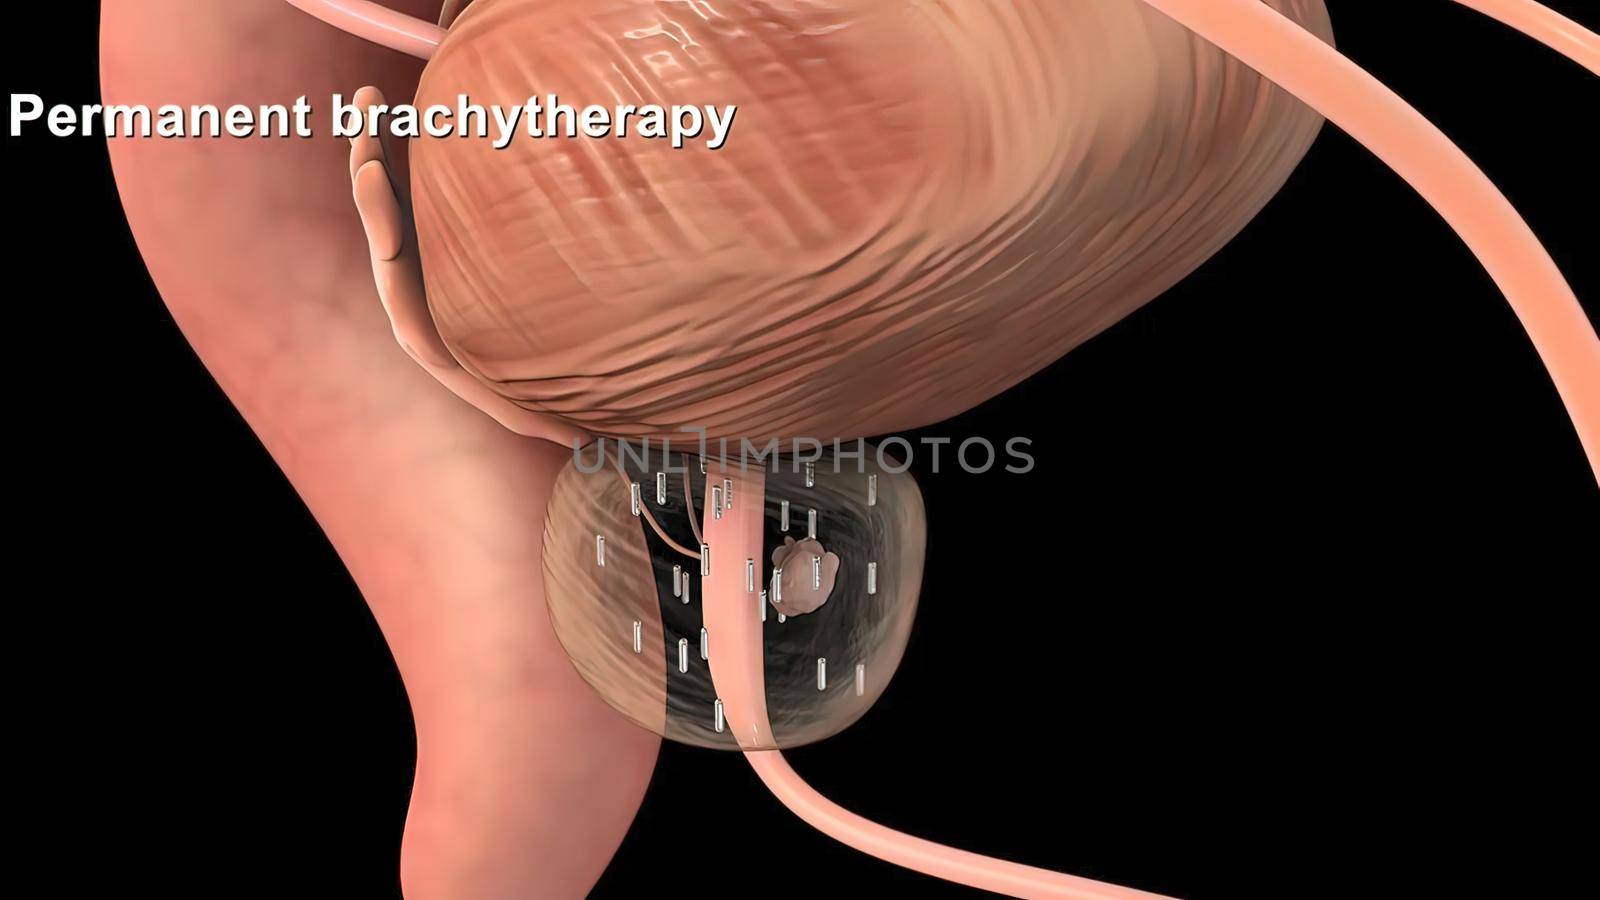 Medically accurate 3d illustration of prostate cancer by creativepic